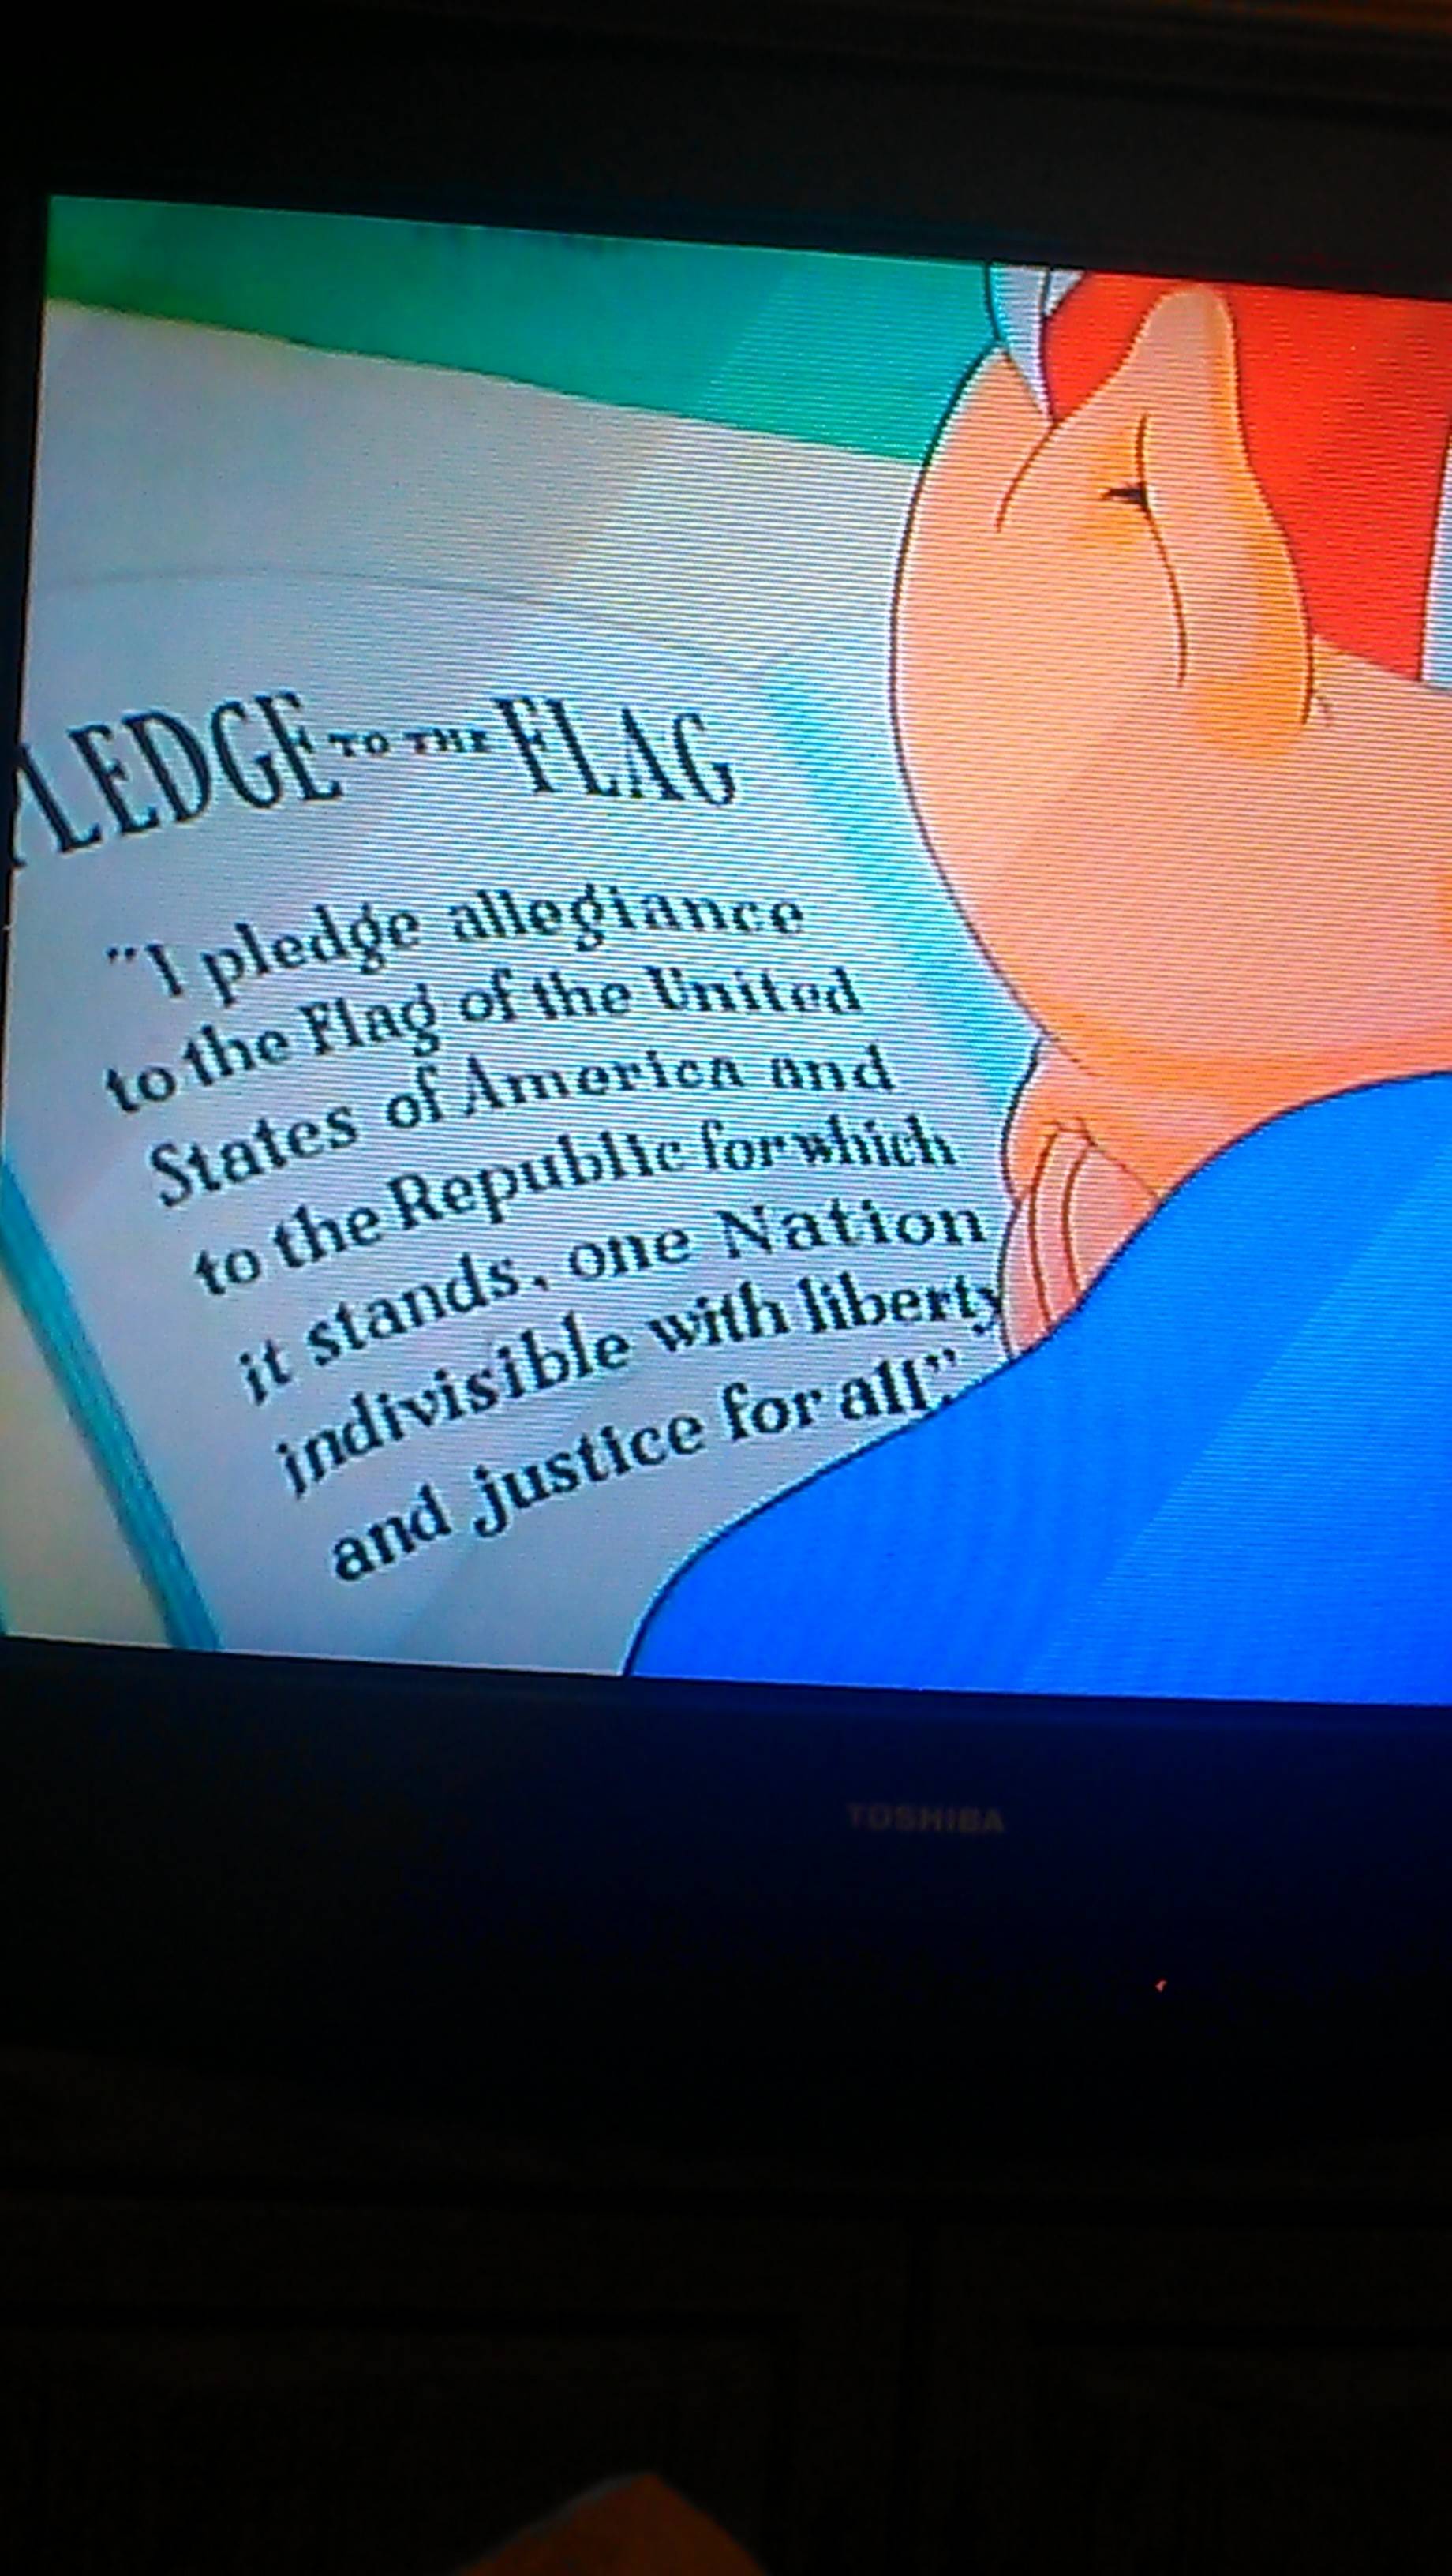 This was in a Looney Tunes cartoon titled "Old Glory" produced in 1939.